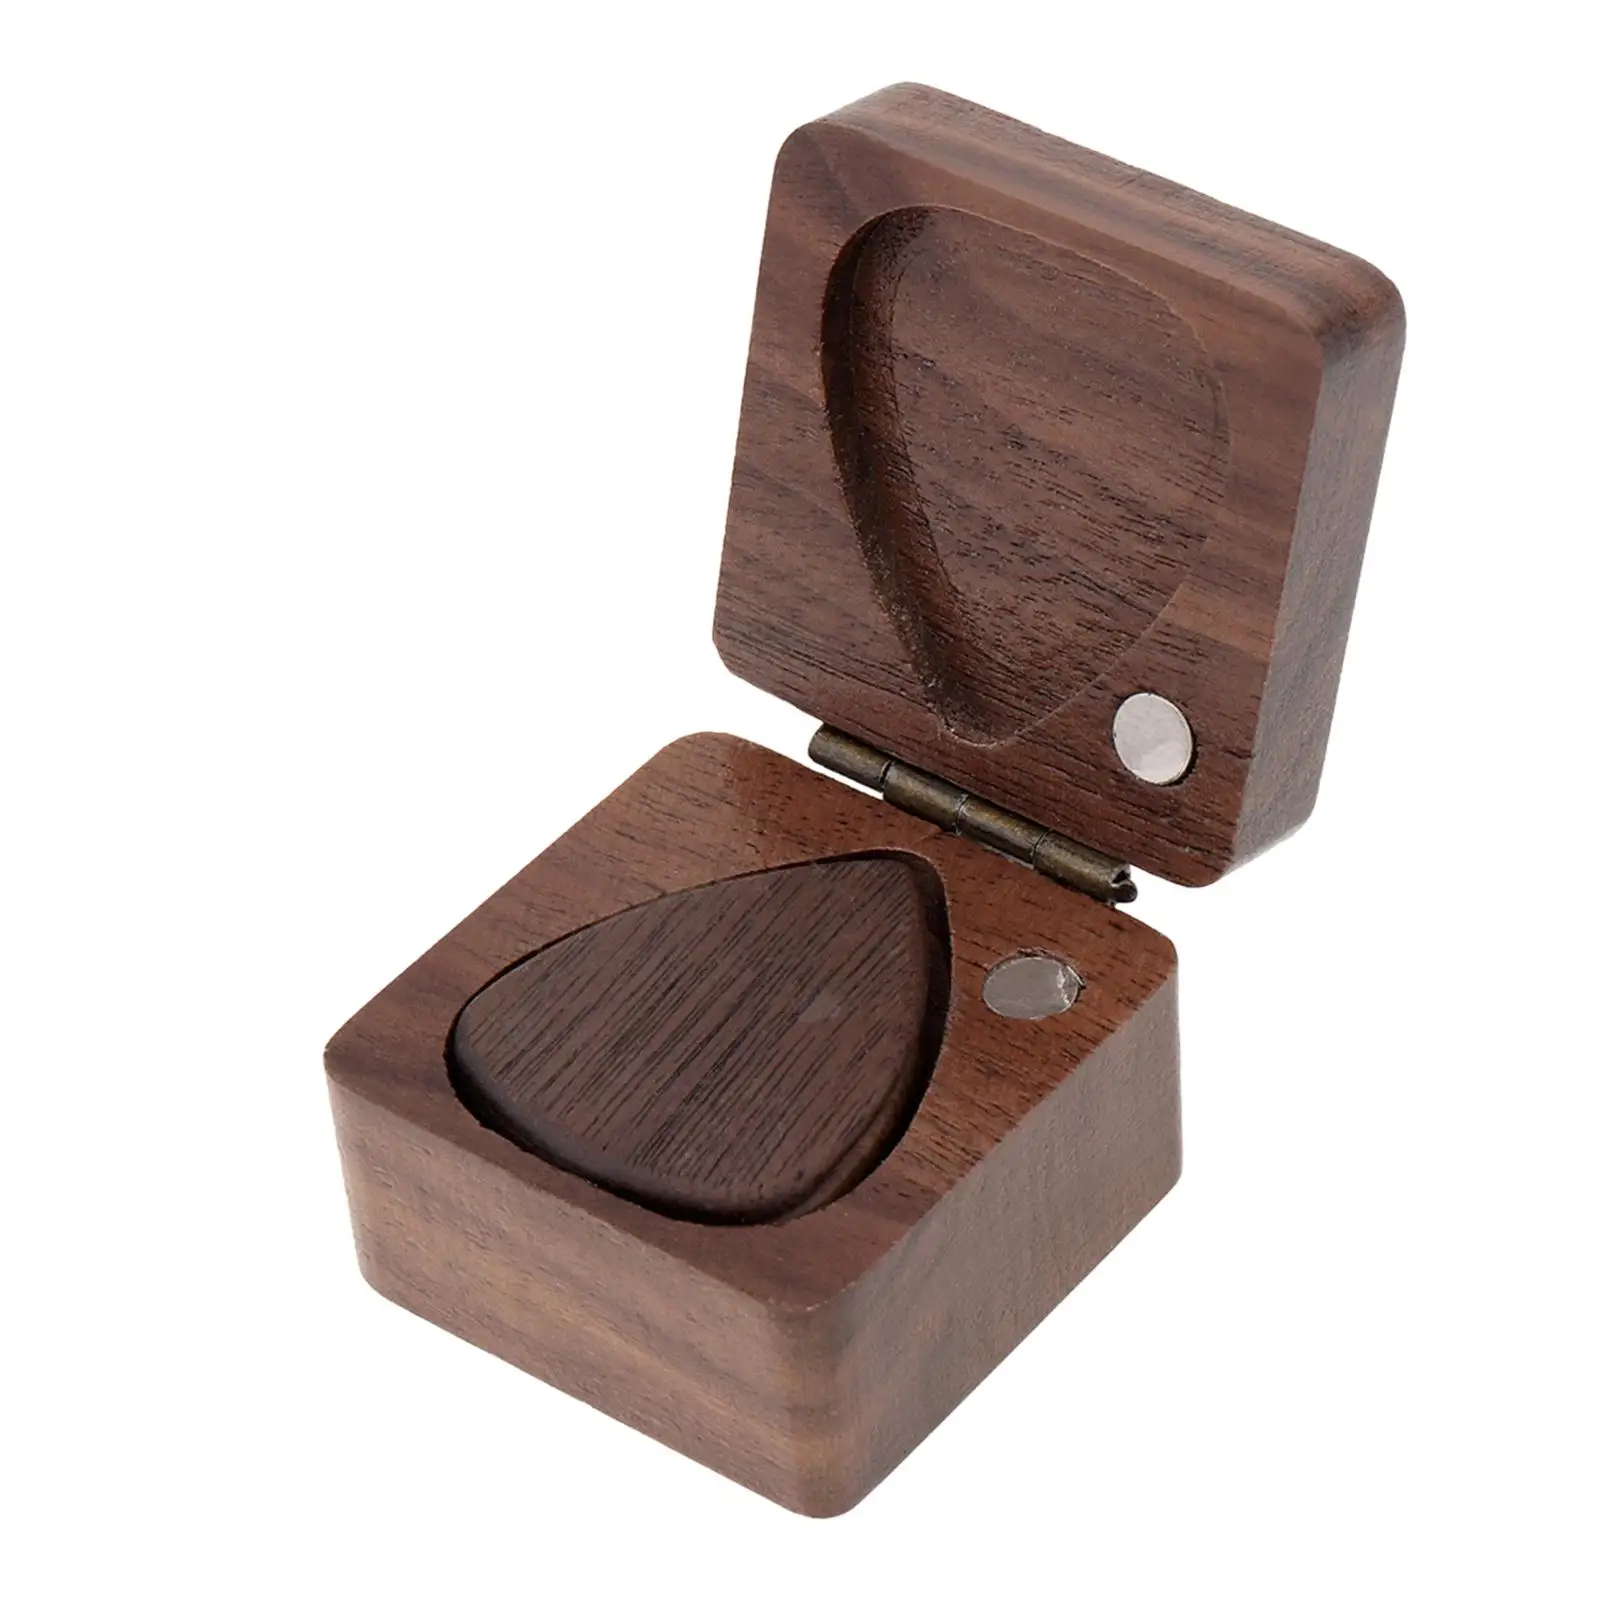 Wooden Guitar Picks Case Protection Sturdy with 3 Guitar Picks Handmade Christmas Gifts Mini Jewelry Box Guitar Pick Box Holder